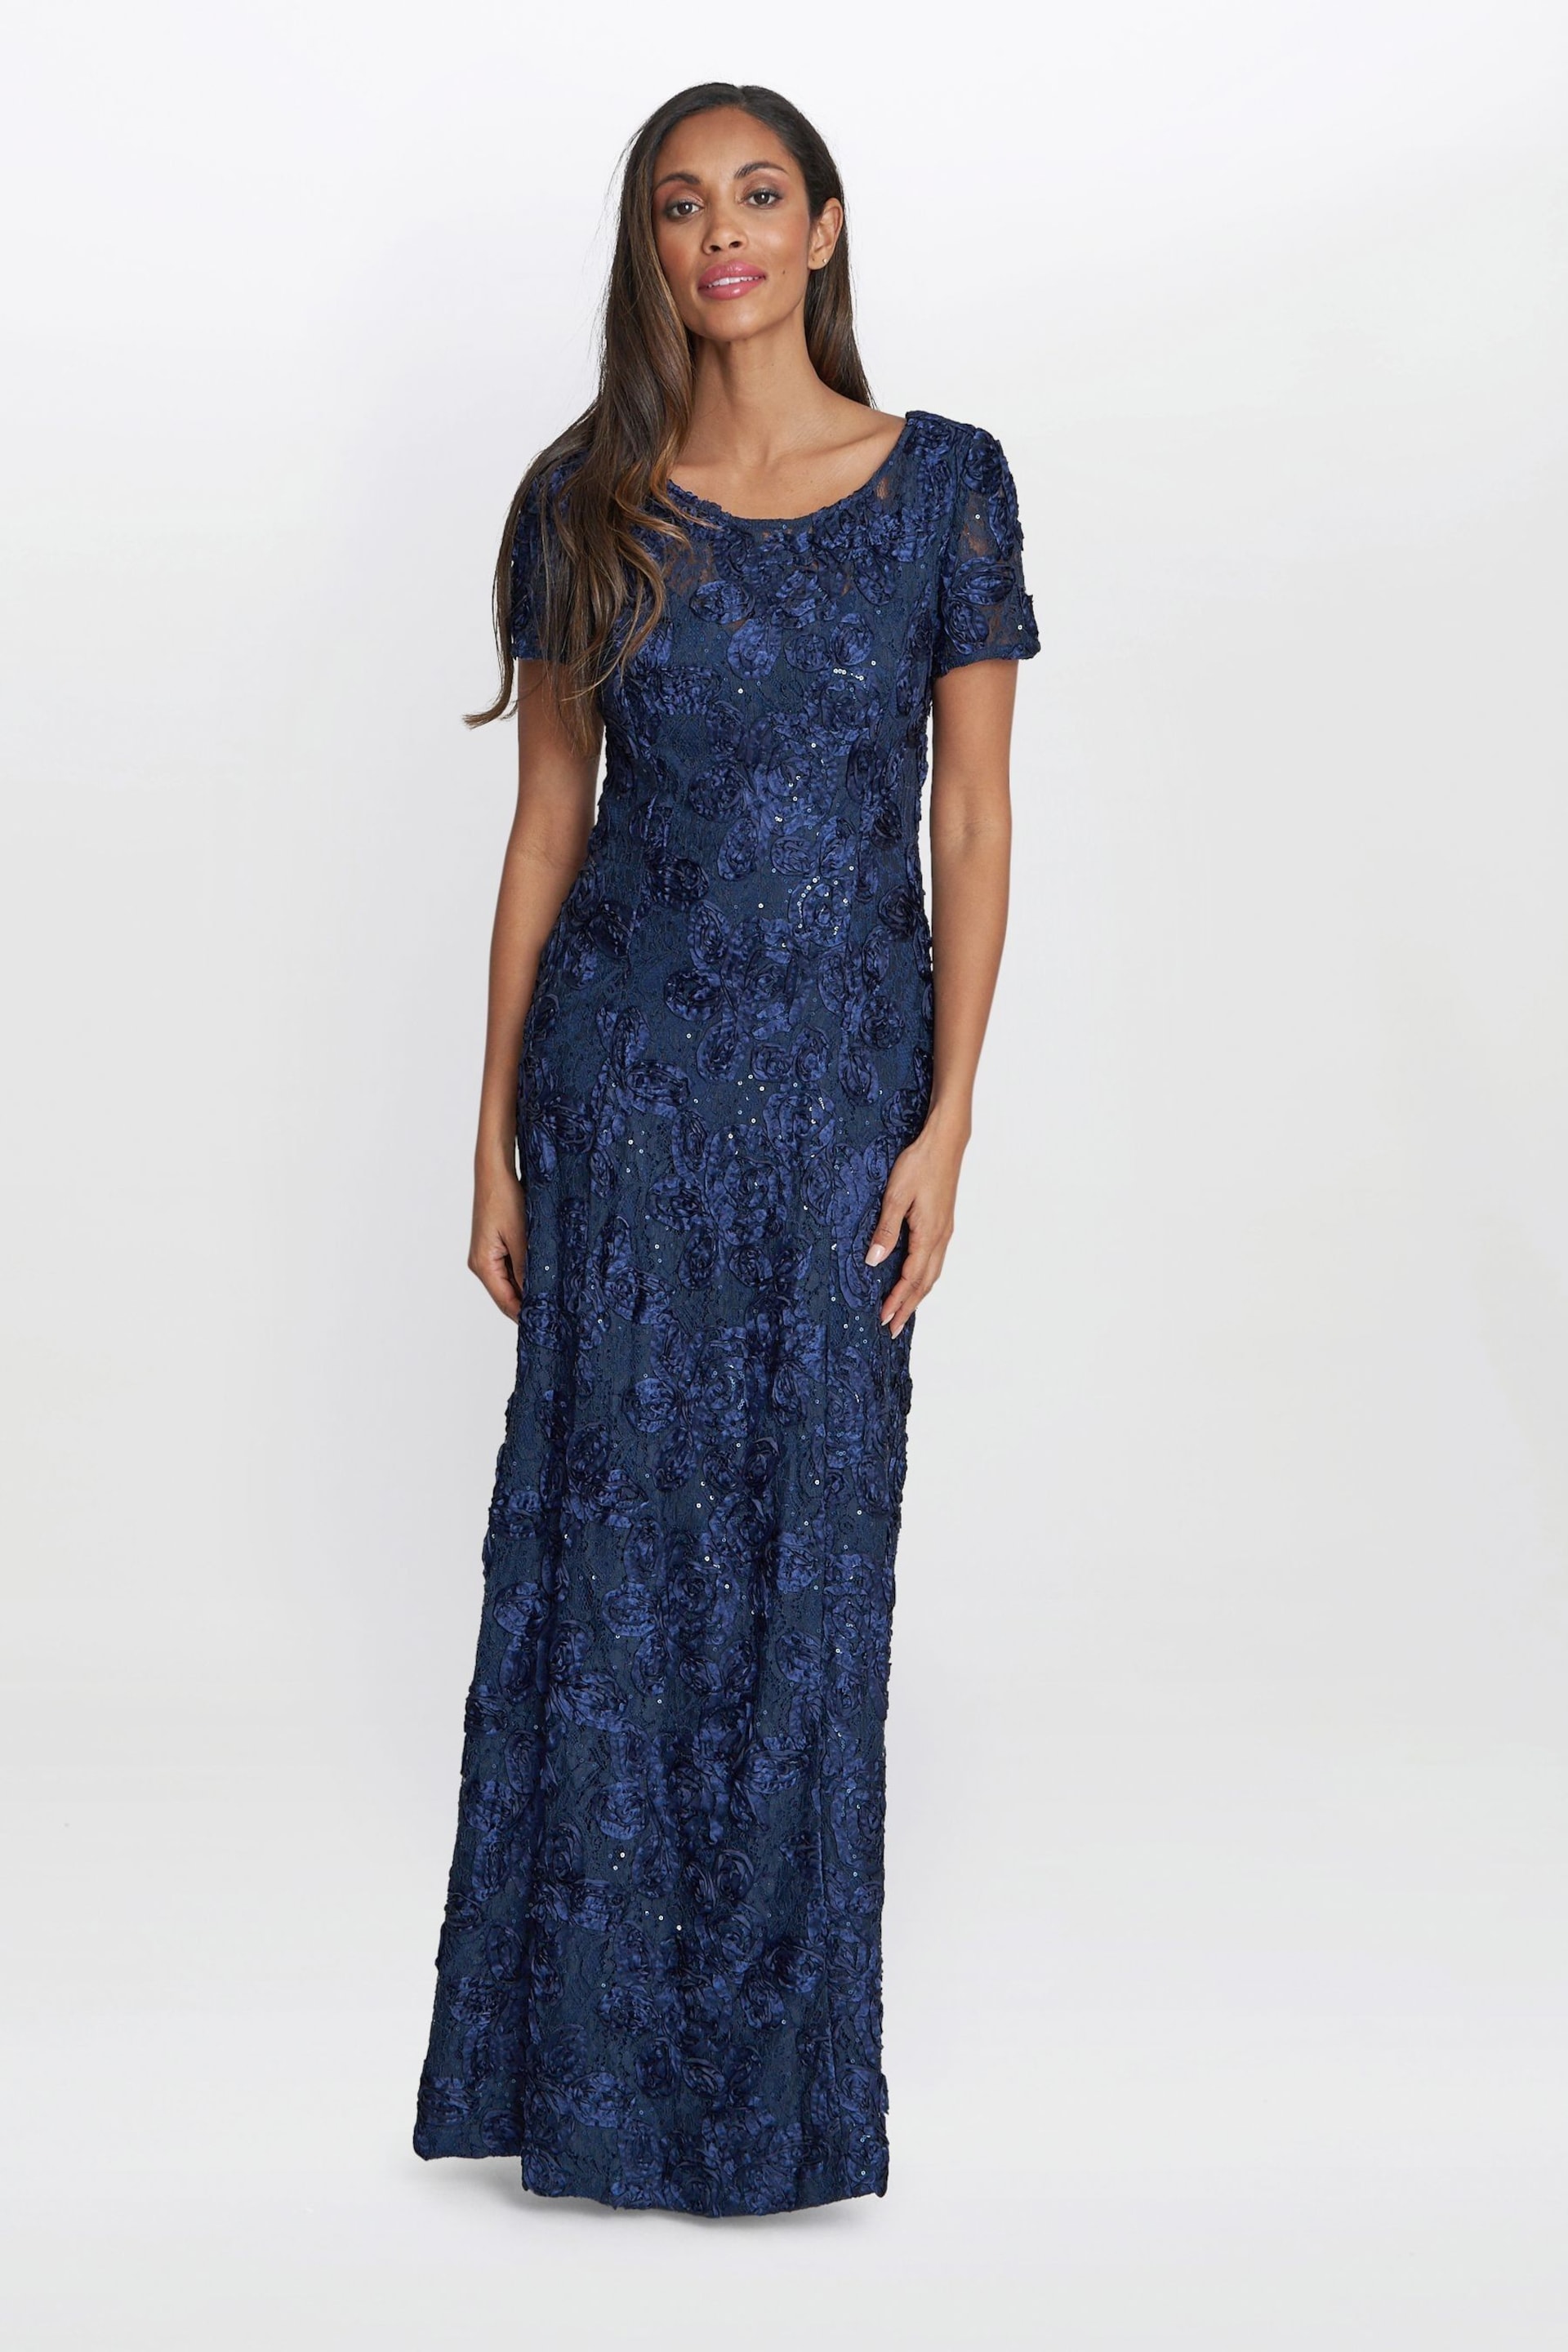 Gina Bacconi Blue Nancy Dress With Rosette Sequin Detail - Image 1 of 5